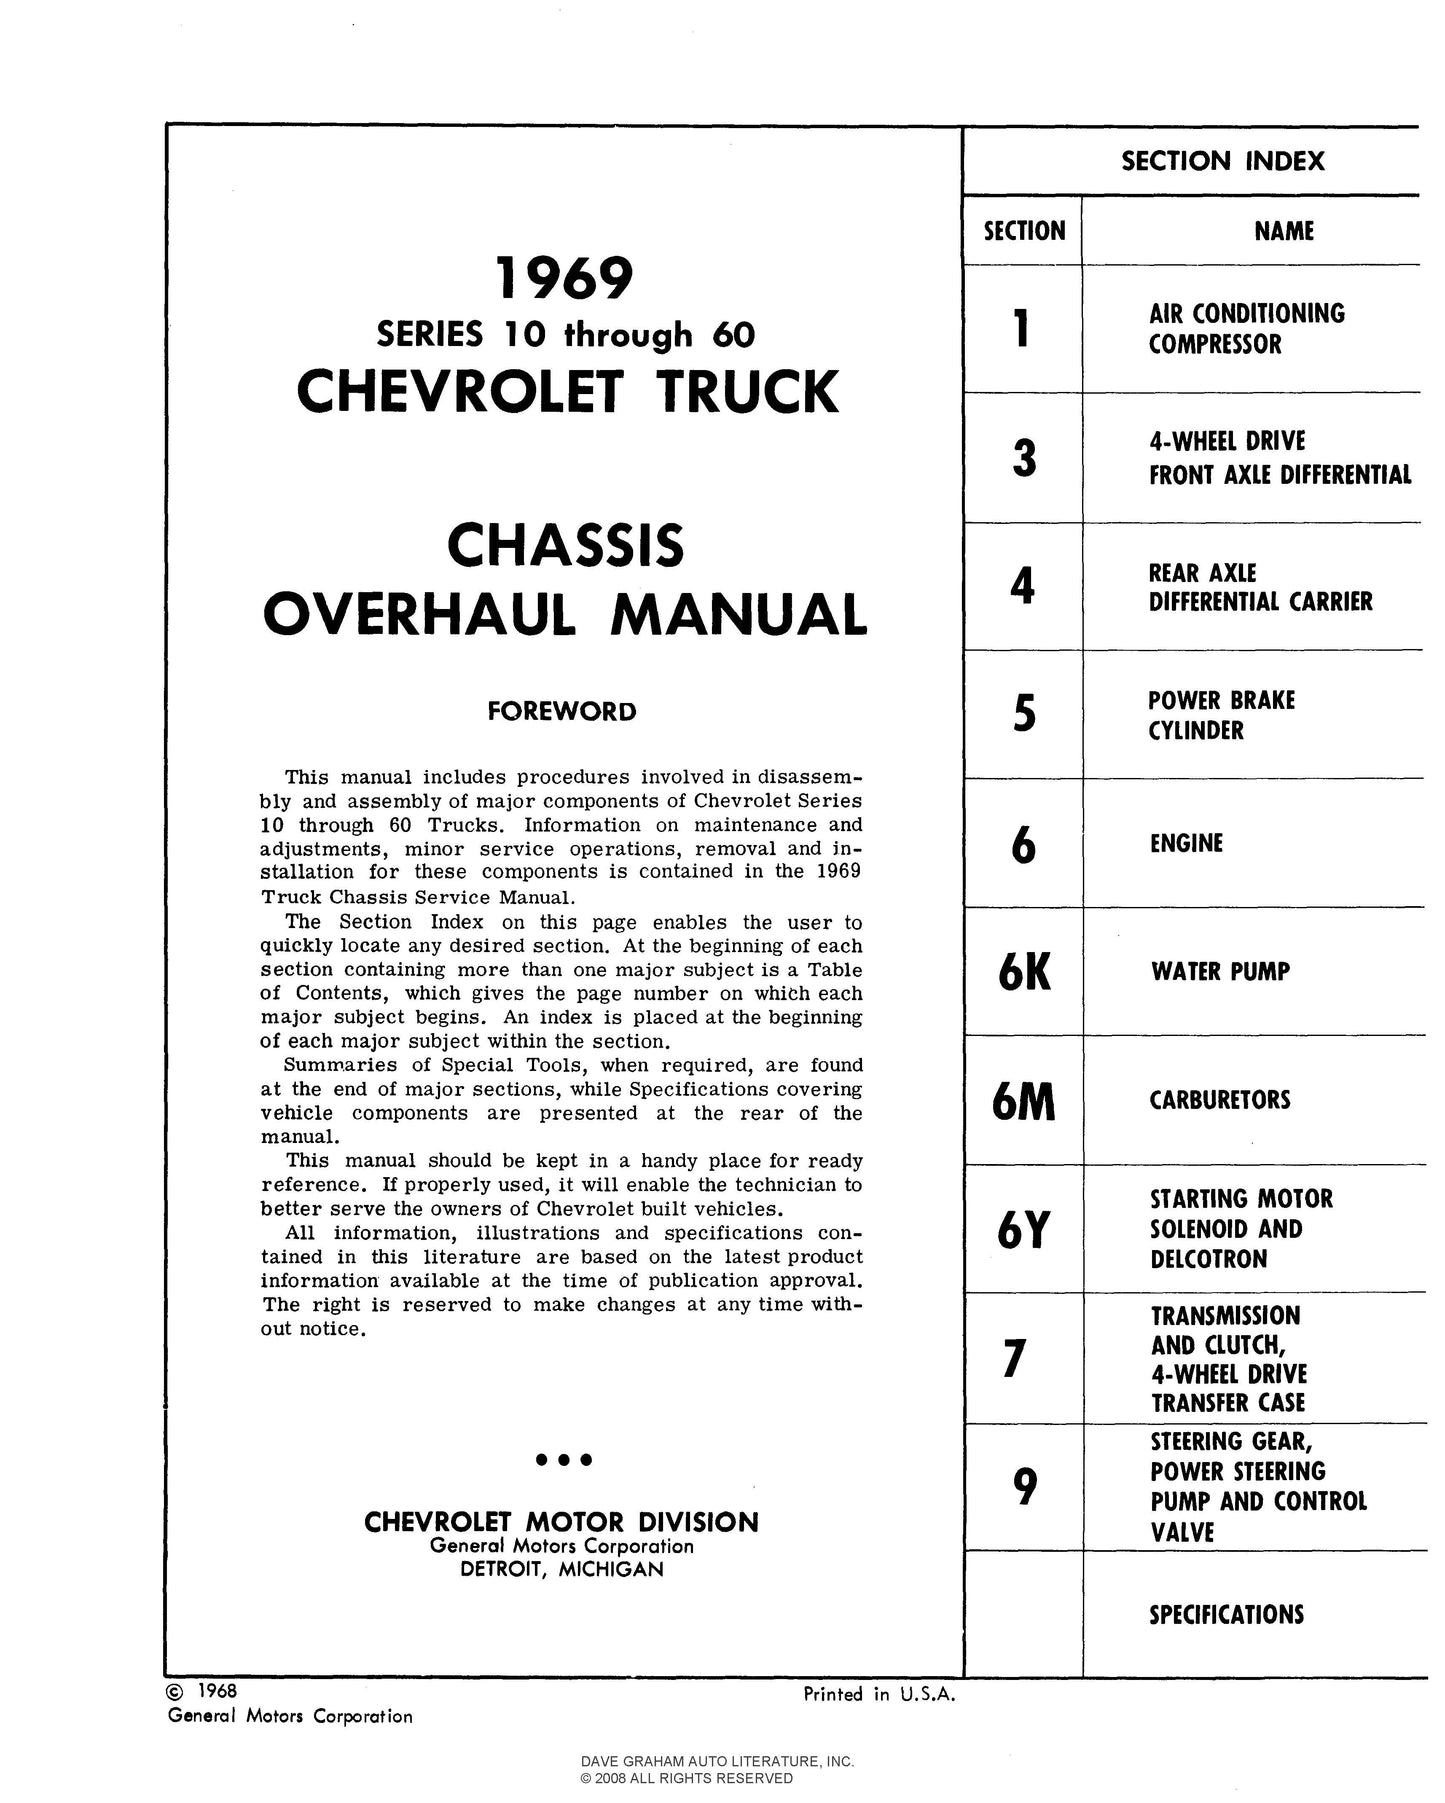 1969 Chevy Shop, Overhaul, & Body Manuals - All Models